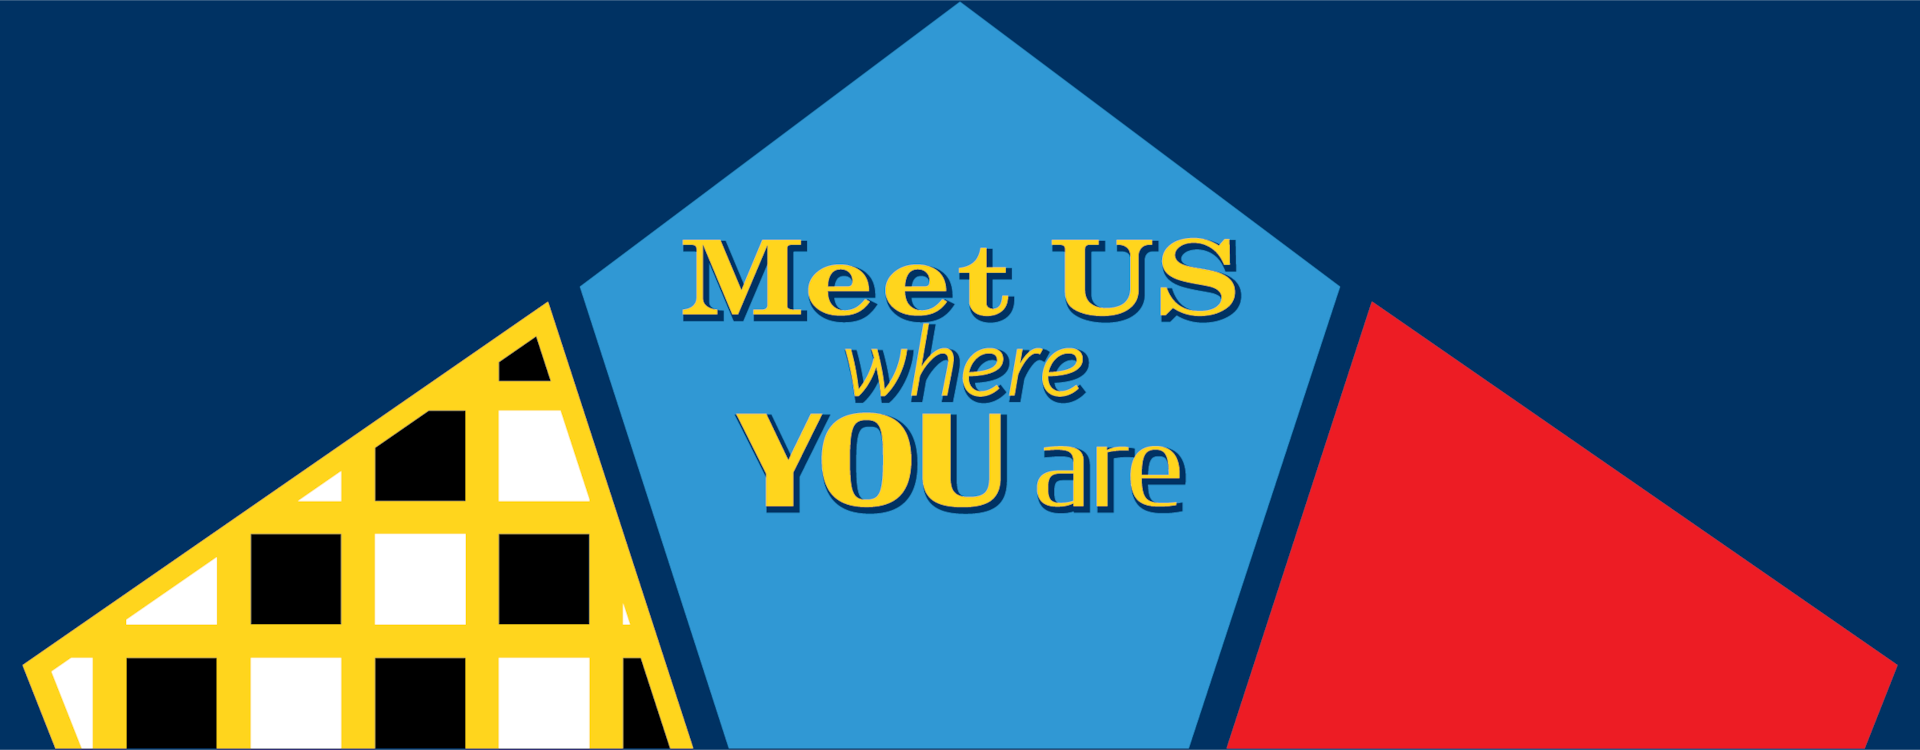 A new logo for the Talent Acquisition Division (TAD) invites potential applicants to "meet us where you are," both professionally and geographically. The new division is part of the United States Military Entrance Processing Command (USMEPCOM) and sources talent from around the U.S.